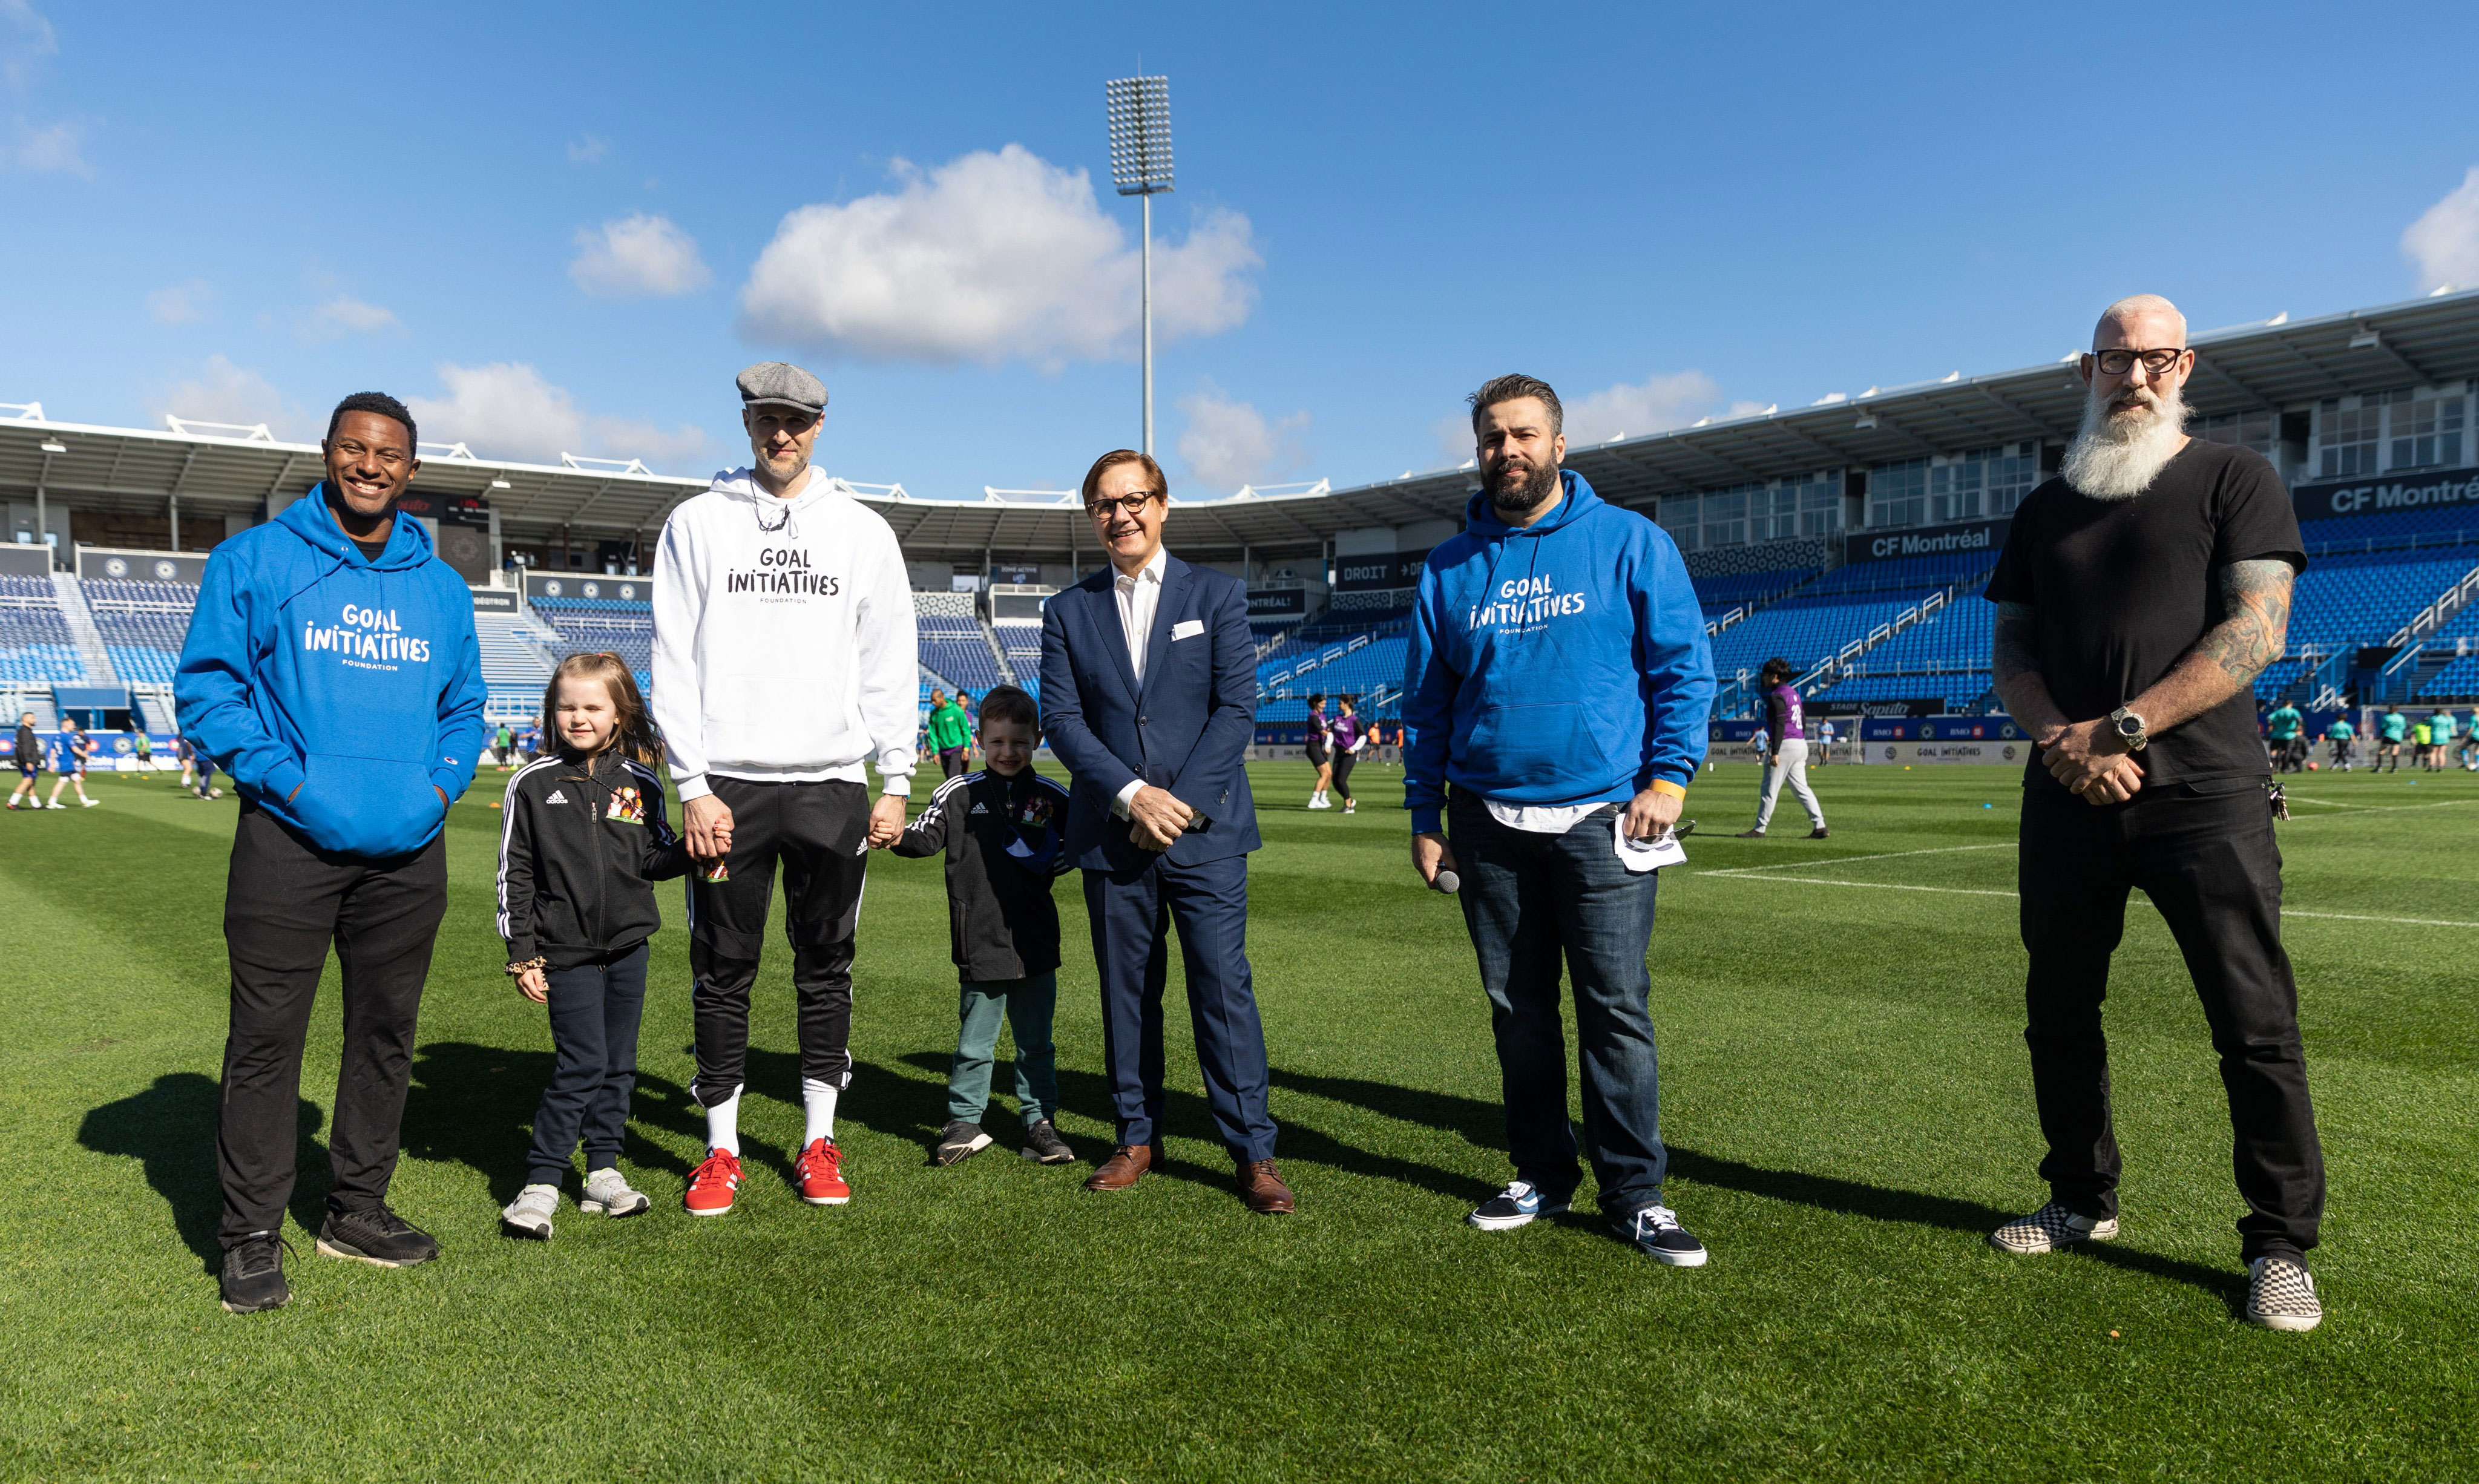 Sunday, October 17, 2021 – Senator Tony Loffreda speaks at the GOAL MTL soccer tournament and skills competition at Saputo Stadium in Montréeal, Quebec. The event, organized by the Goal Initiatives Foundation, promotes mental health and wellness through play.